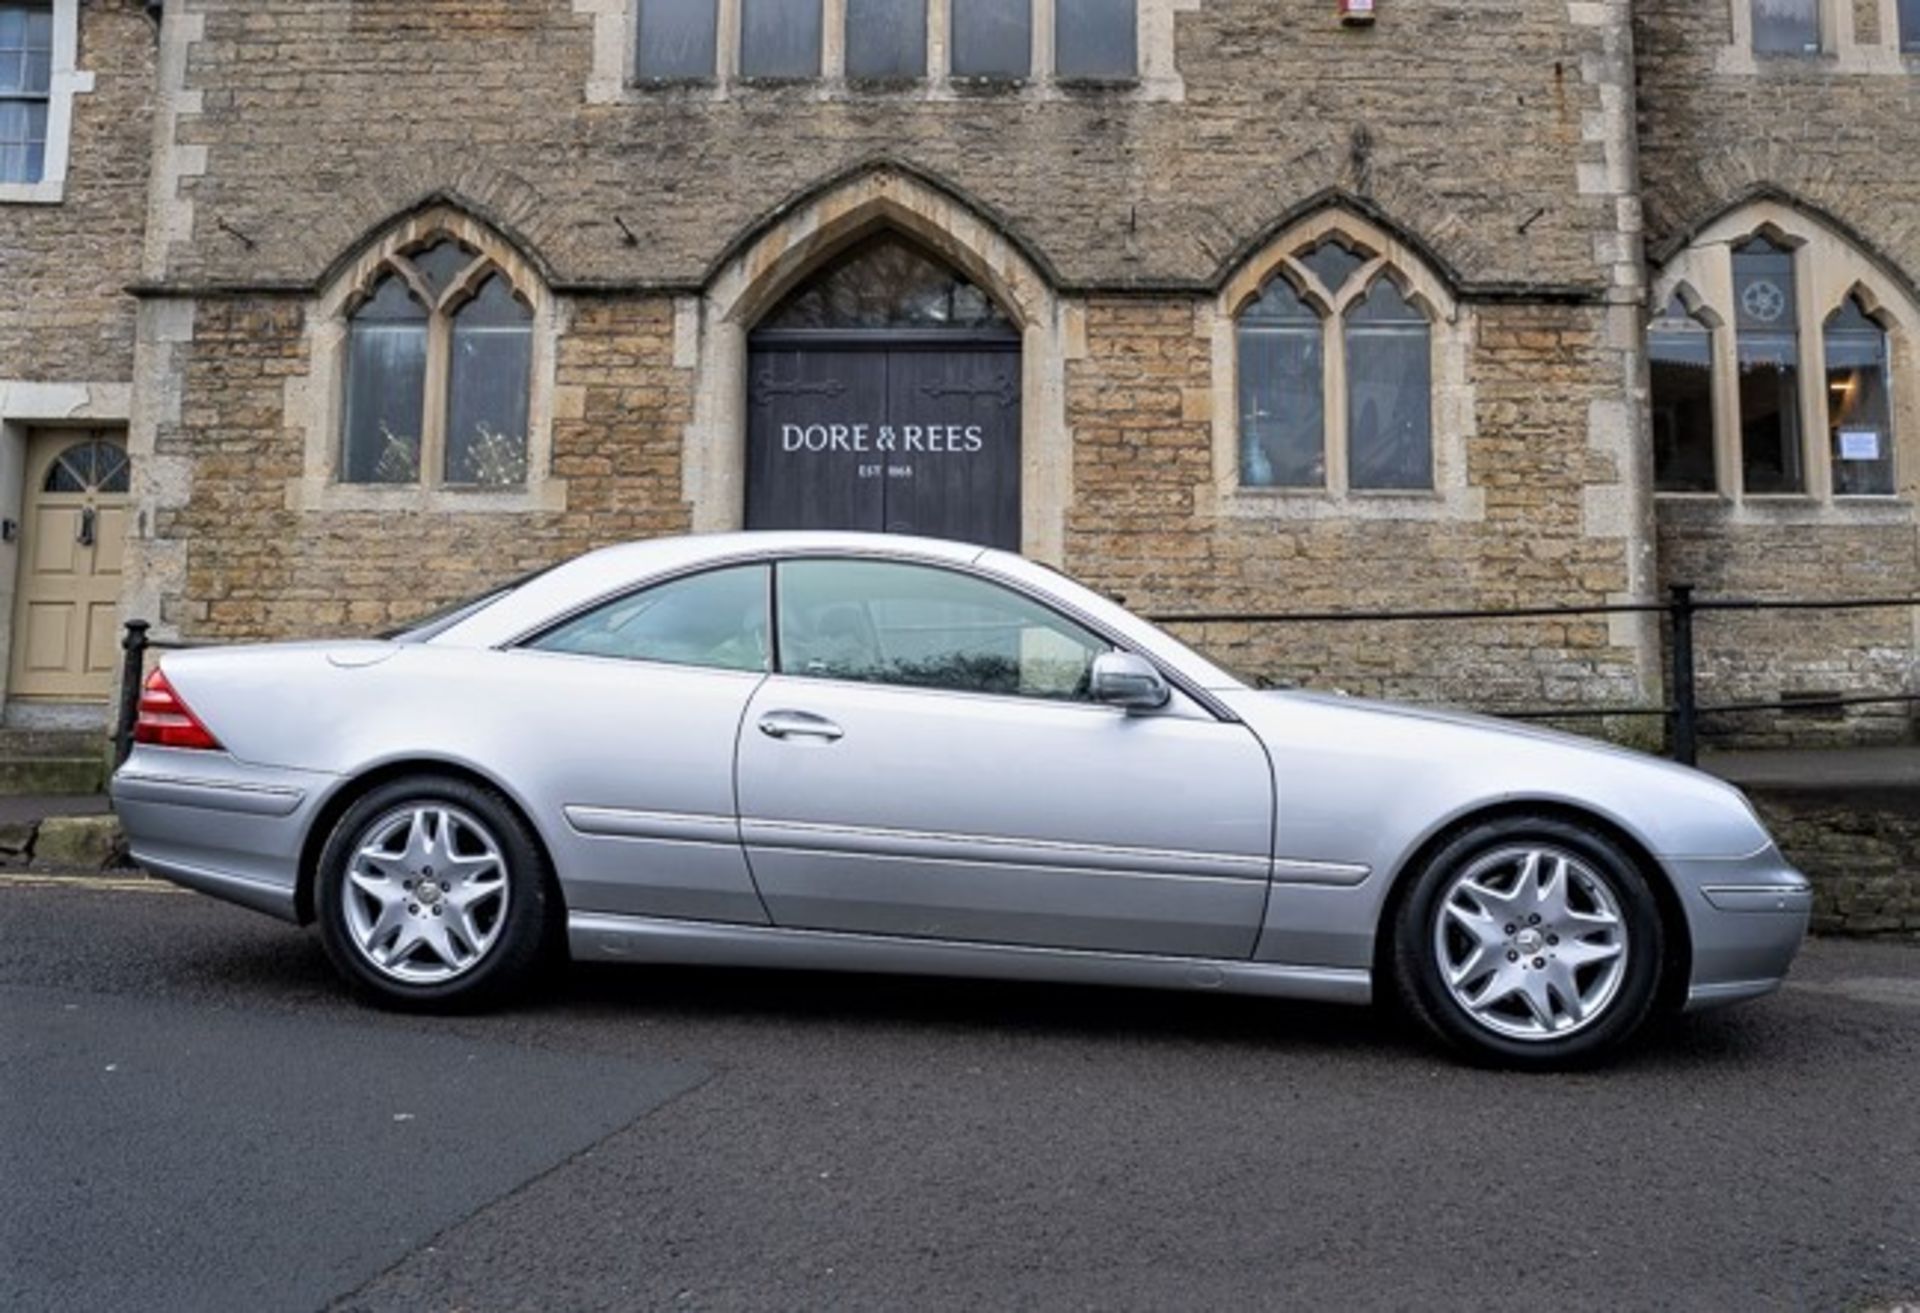 2000 Mercedes CL500 Coupe - Image 2 of 13